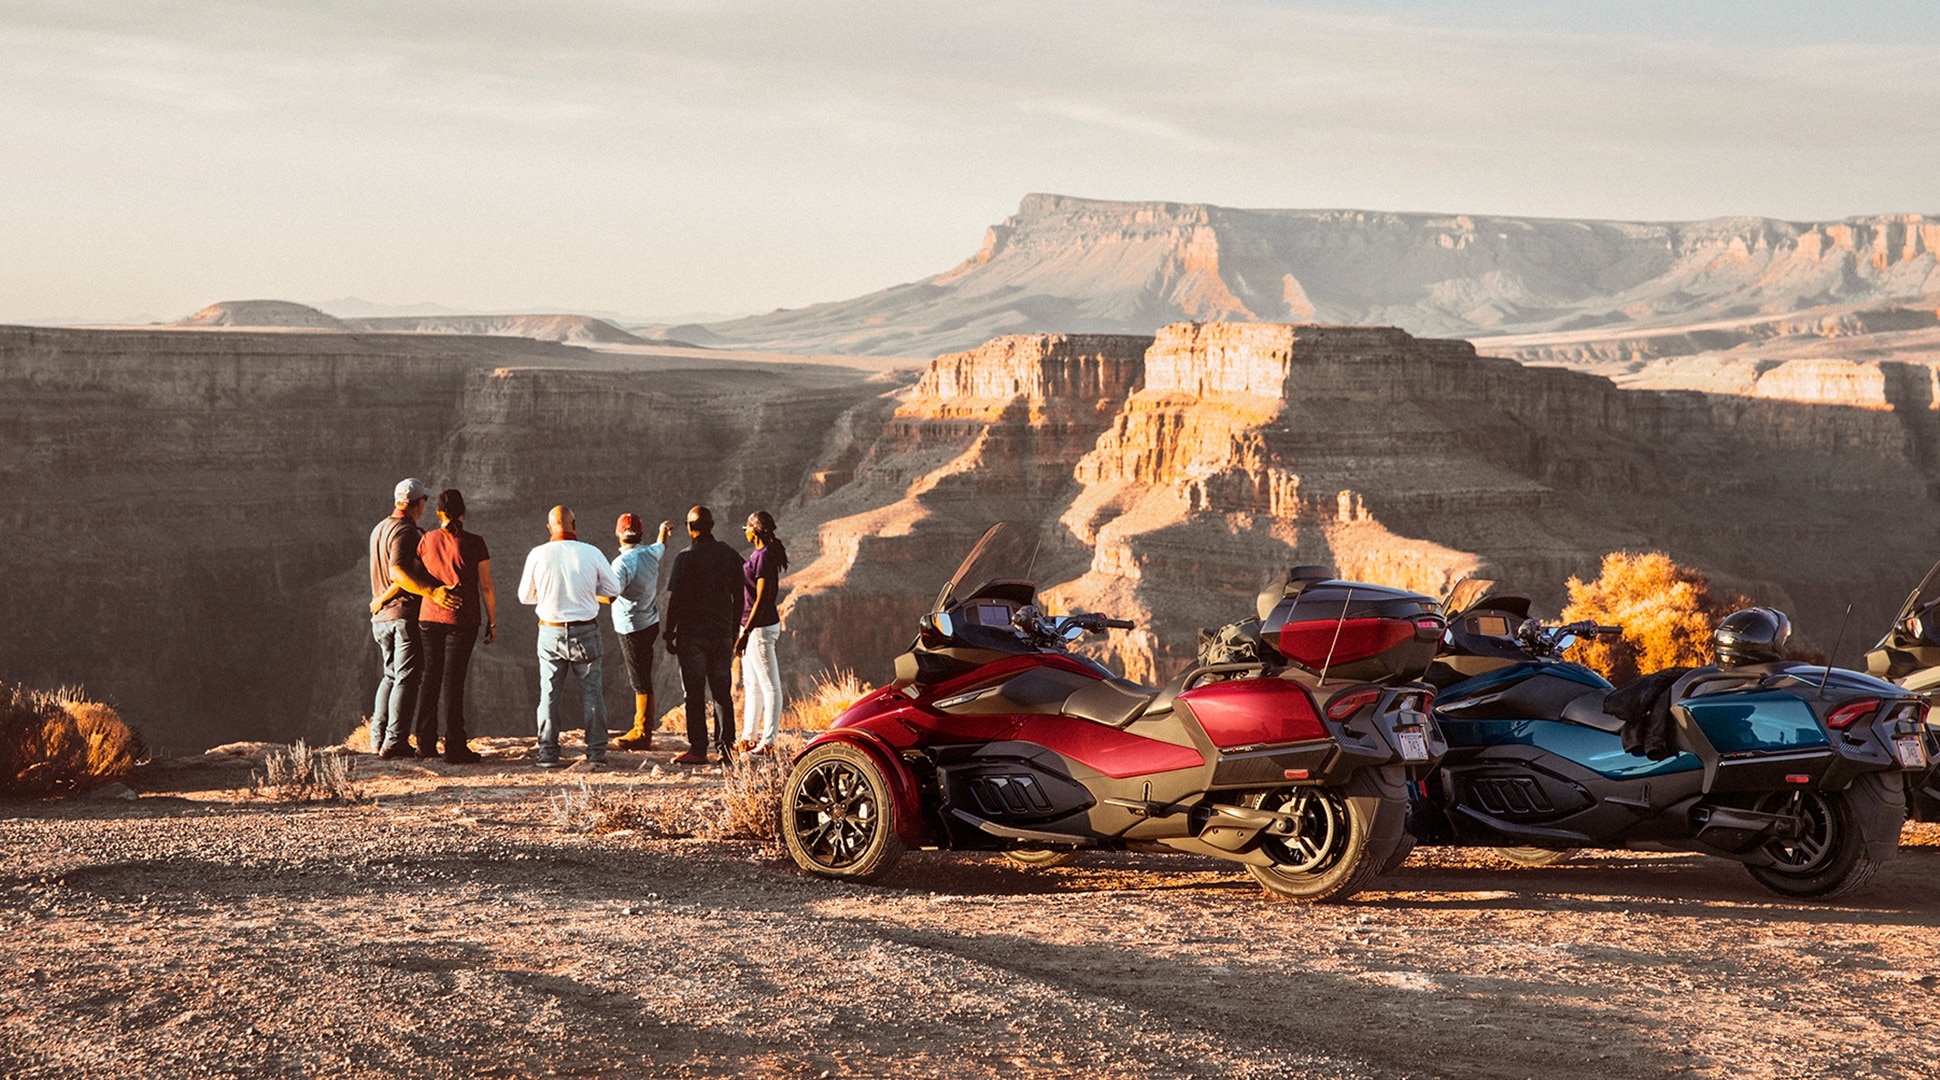 Group of riders overlooking a canyon